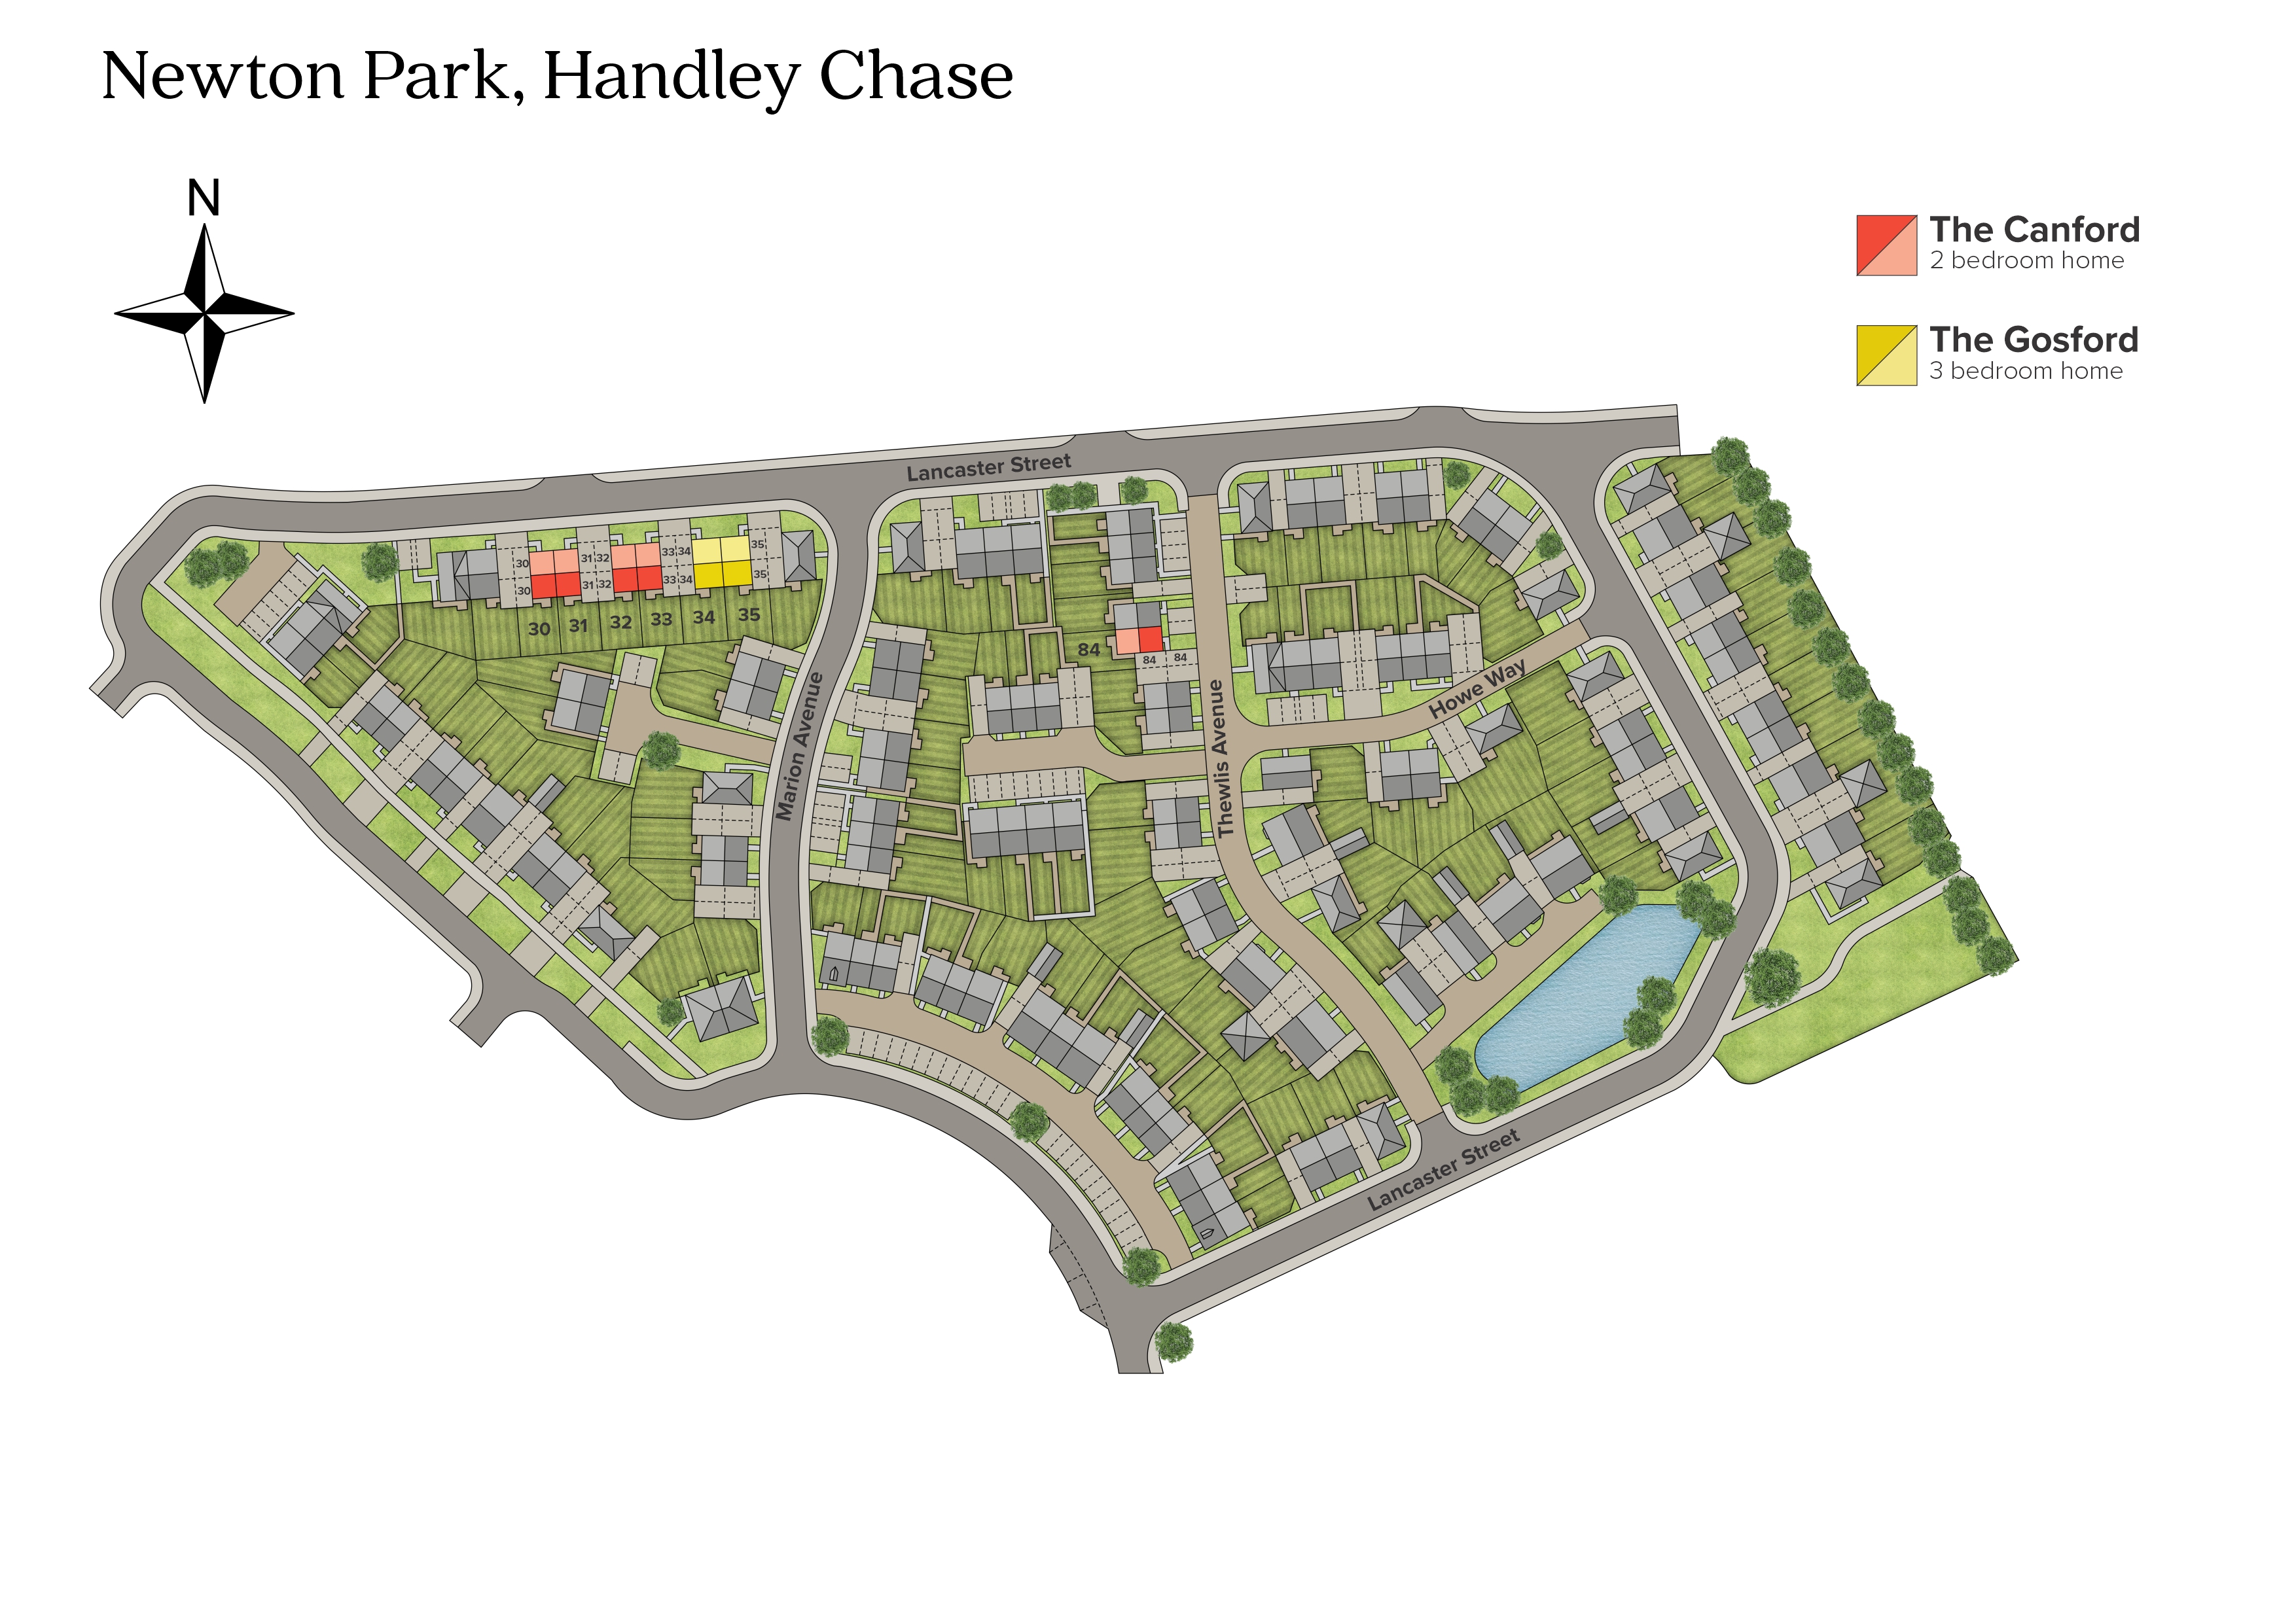 Newton Park site plan for Shared Ownership